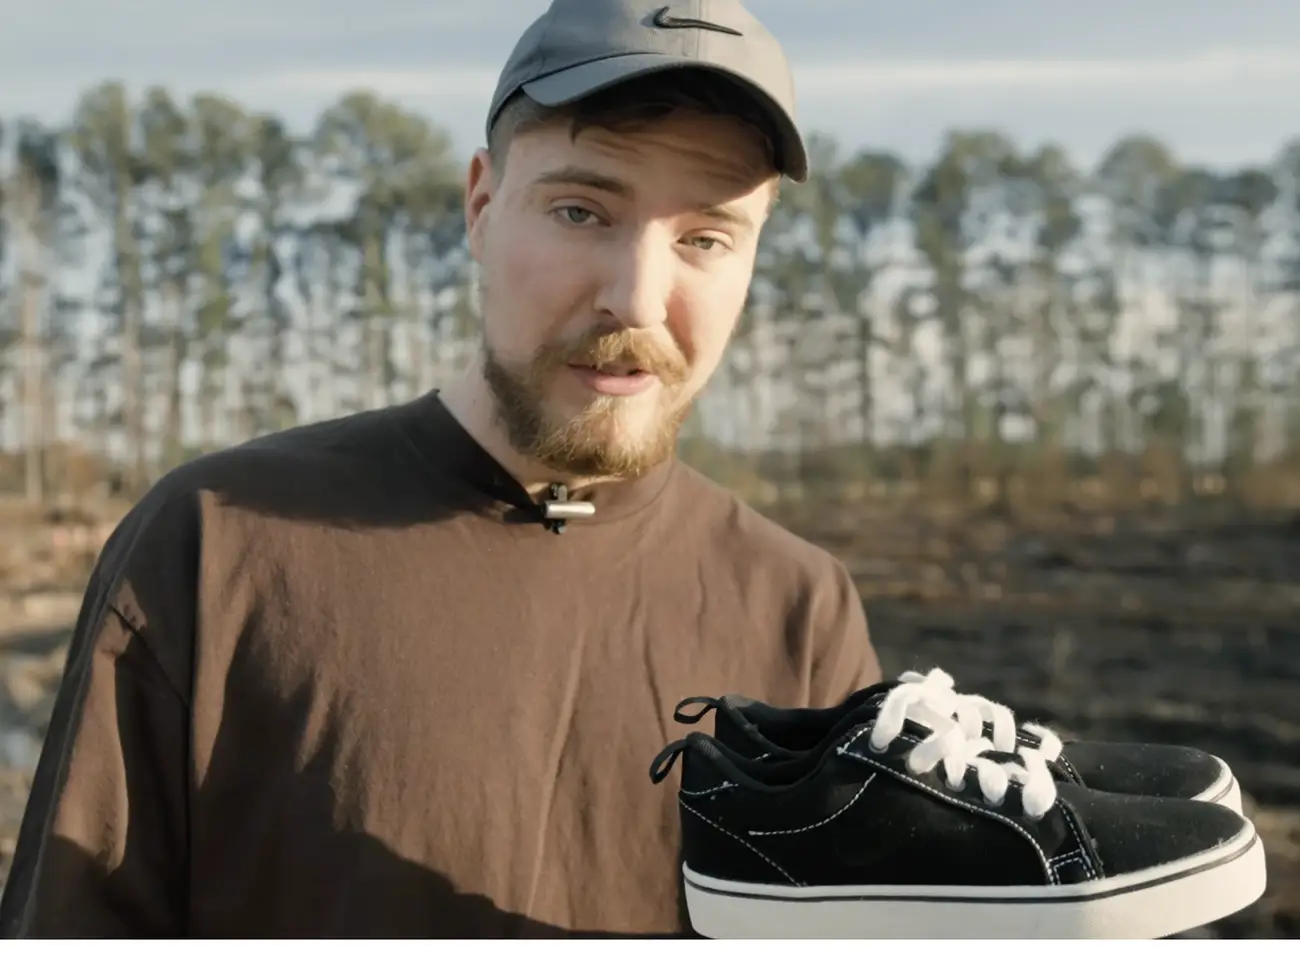 MrBeast to Step into Sneaker Game - Will his Kicks Have a Beastly Bite or Fall Flat on their Feet?